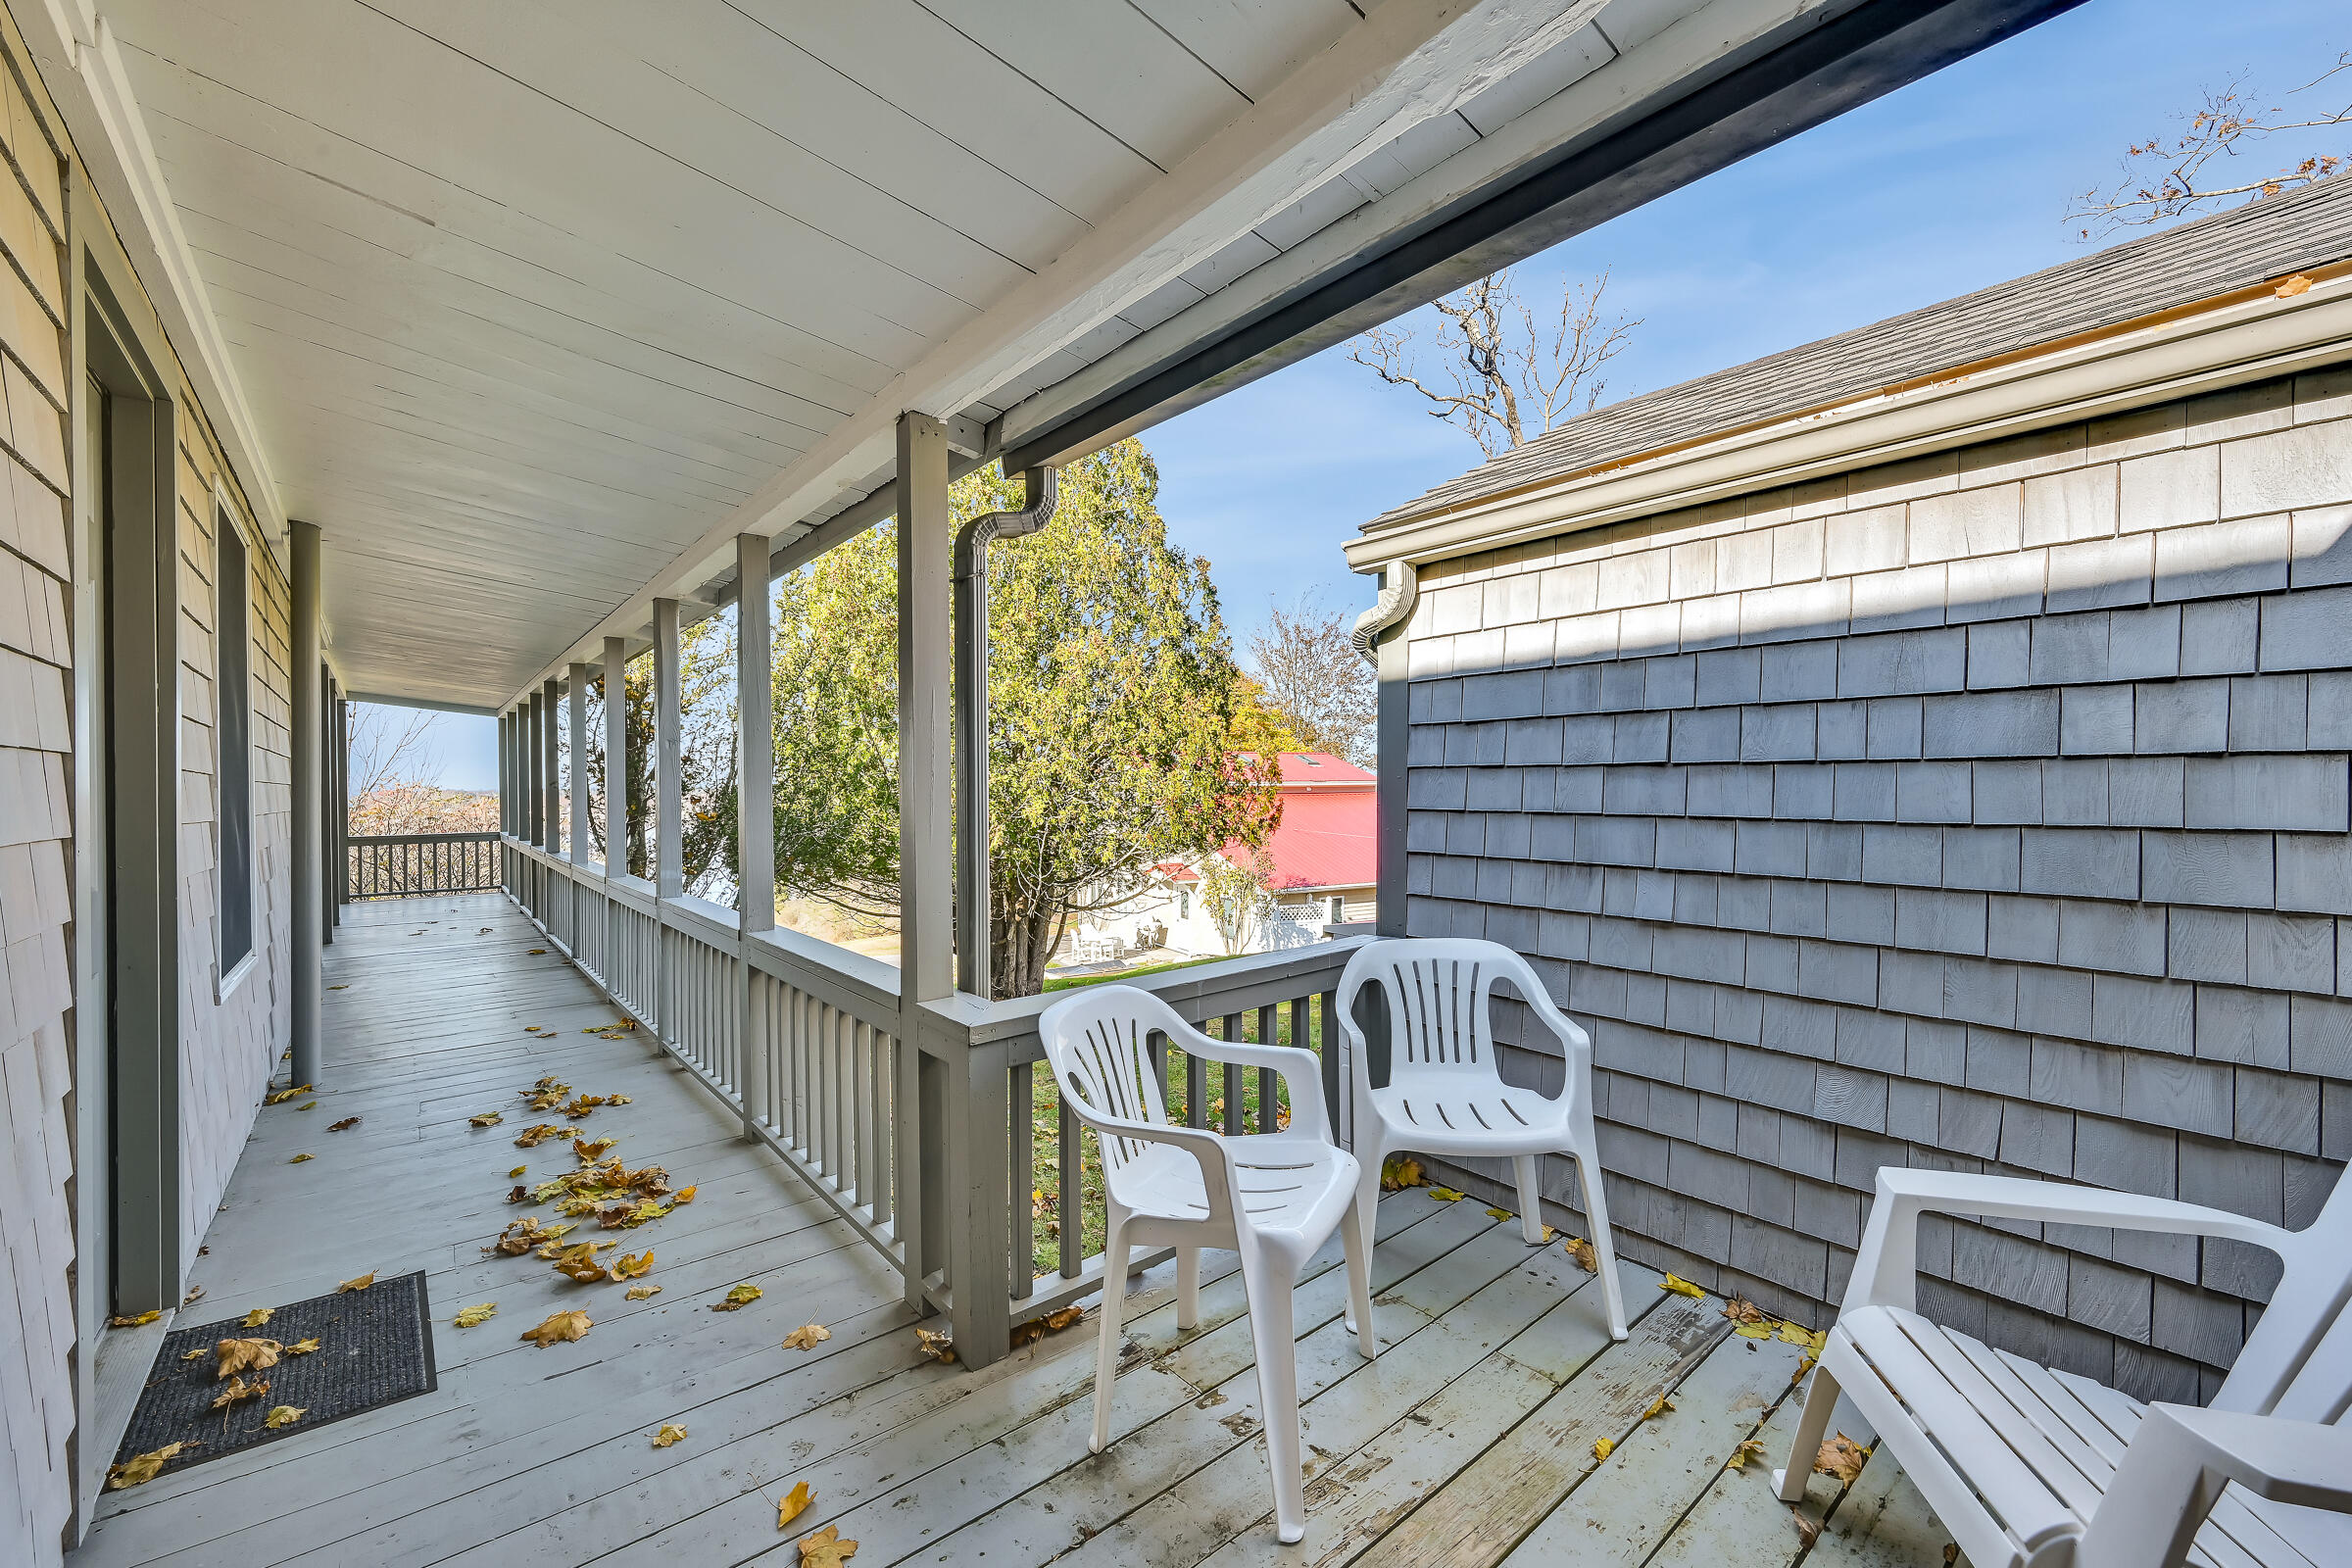 1574 Harpswell Island Road, Harpswell, Maine, 04079, United States, 3 Bedrooms Bedrooms, ,1 BathroomBathrooms,Residential,For Sale,1574 Harpswell Island Road,1487535